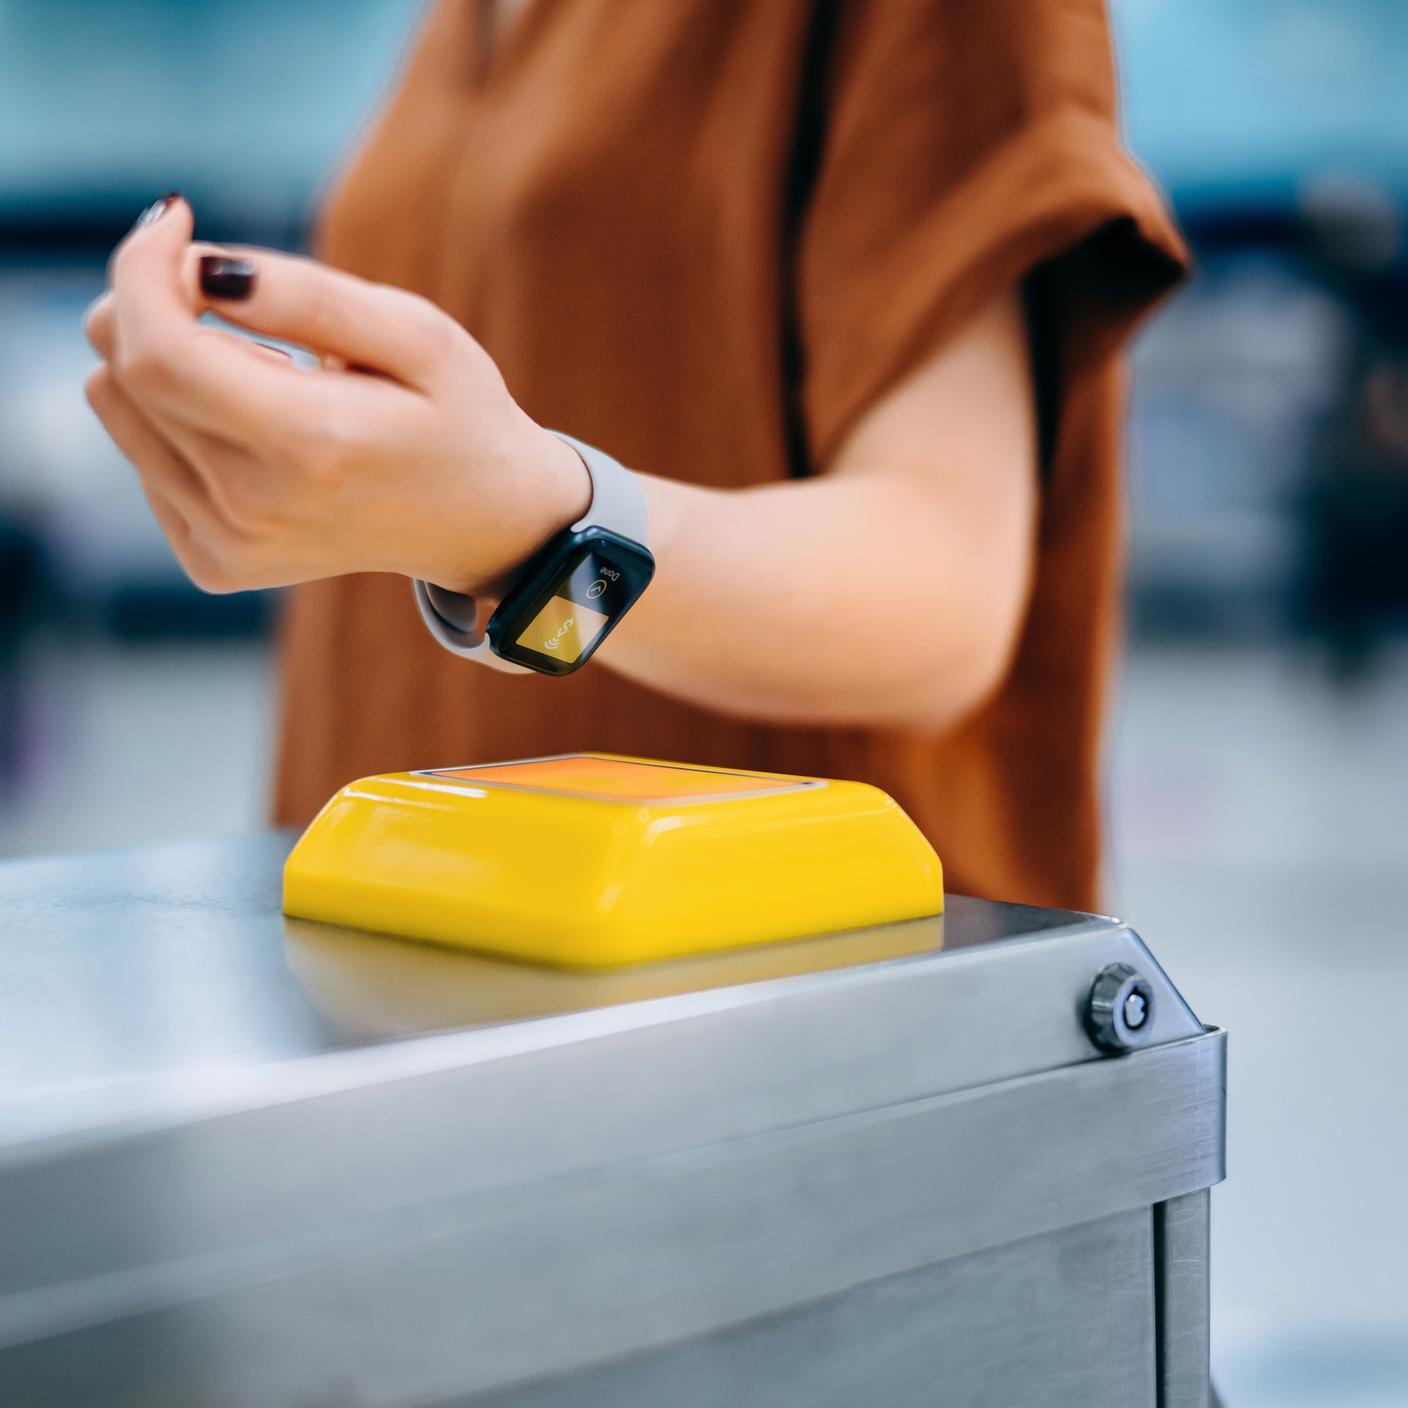 Woman checking in at subway station, making a contactless payment for subway ticket via smartwatch.